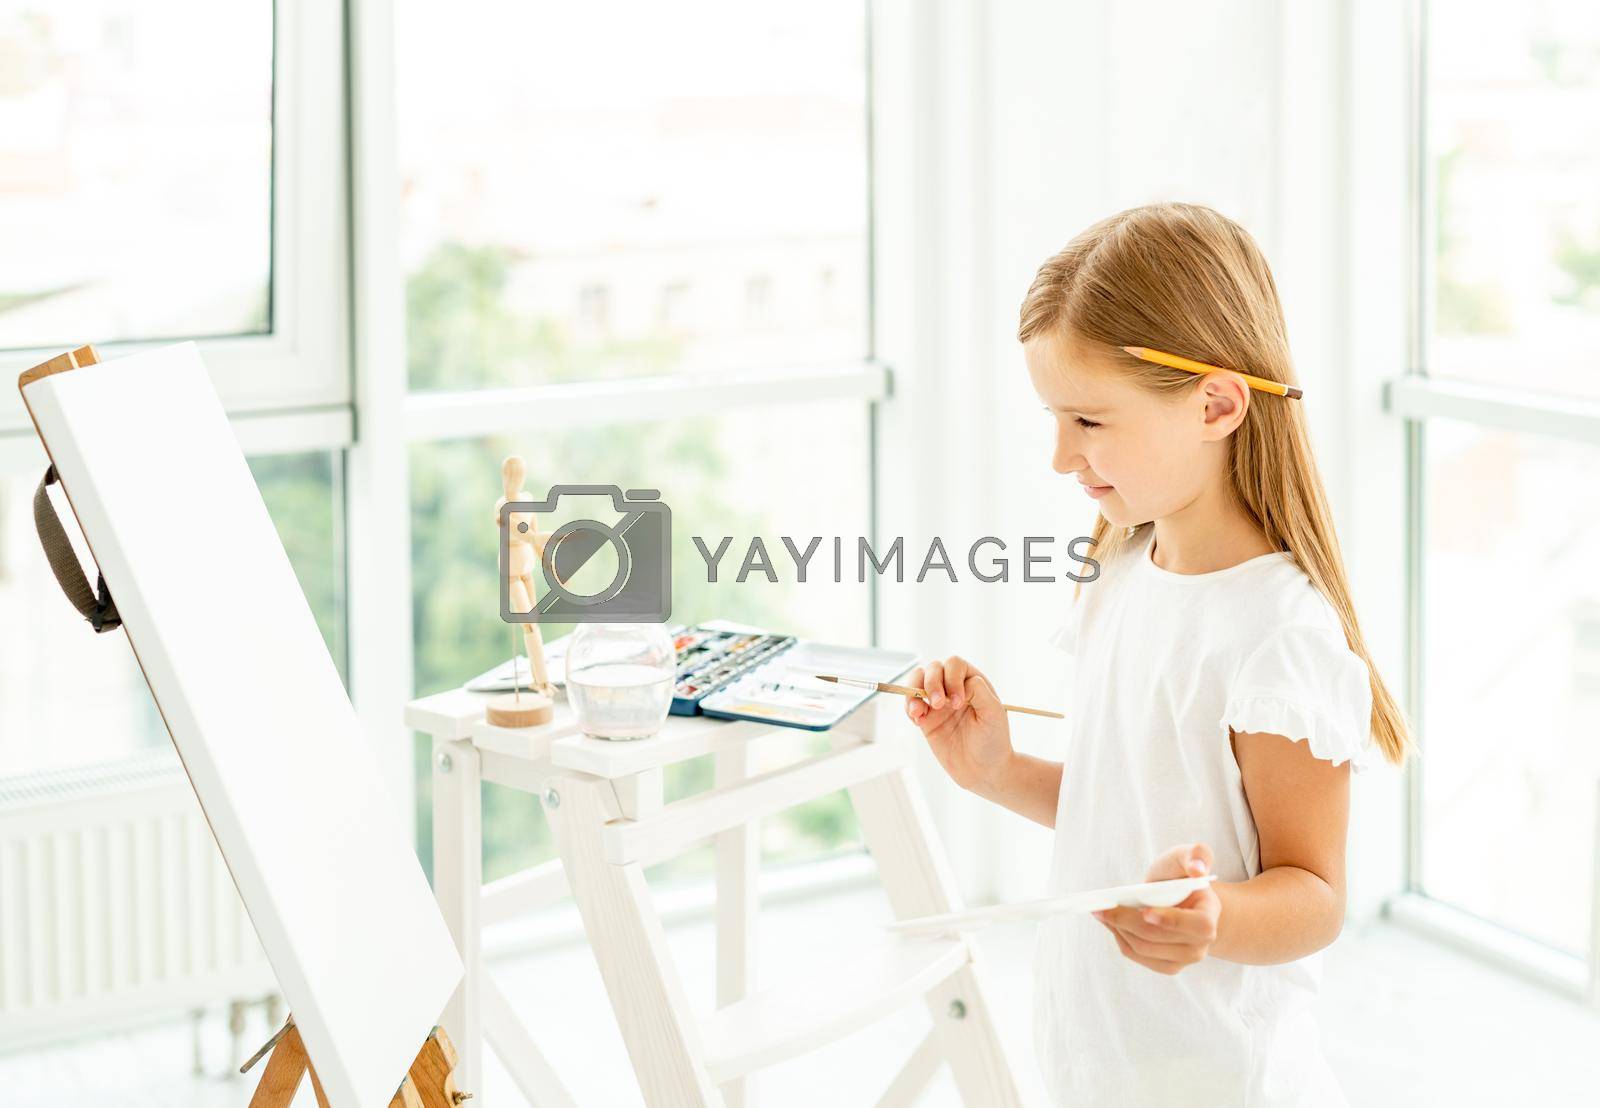 Royalty free image of Kid girl painting different pictures on easel by tan4ikk1